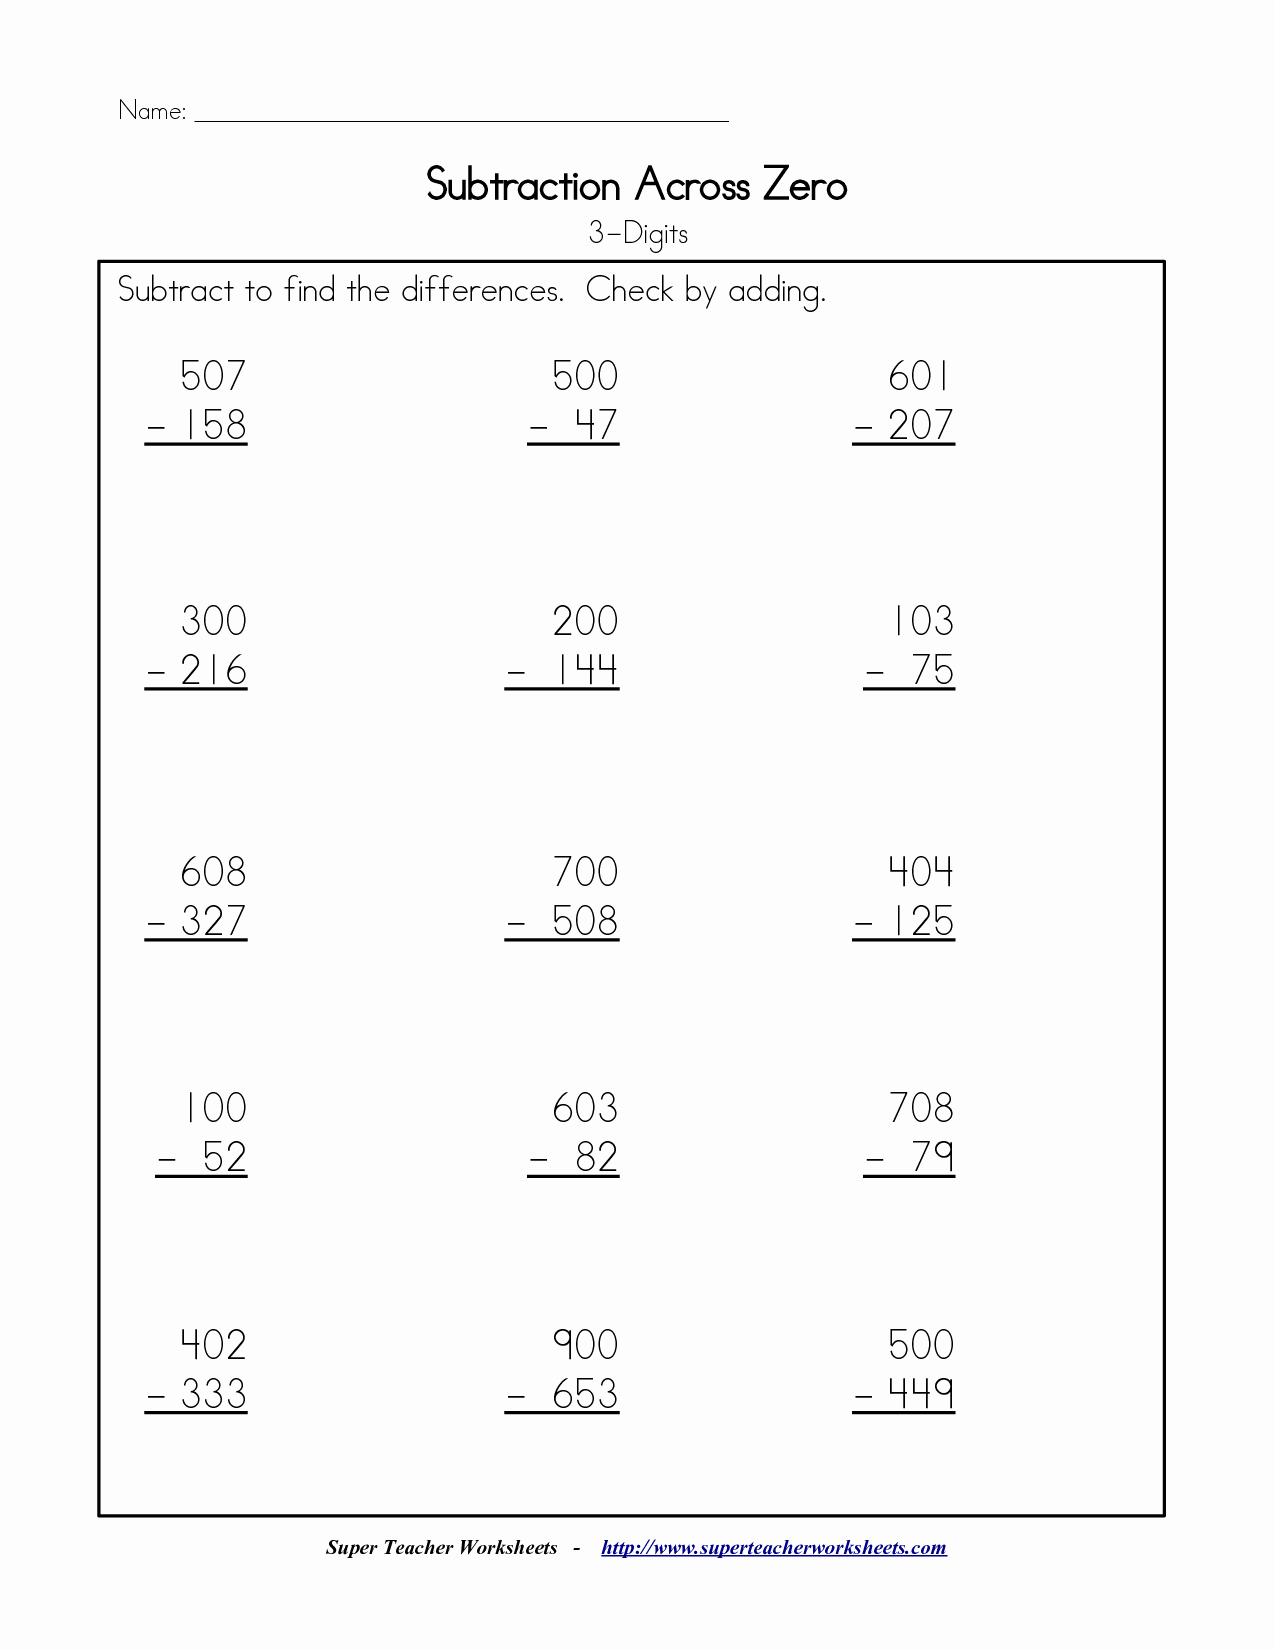 Subtraction Across Zeros Worksheet Awesome Worksheet Subtract Across Zeros Worksheet Grass Fedjp